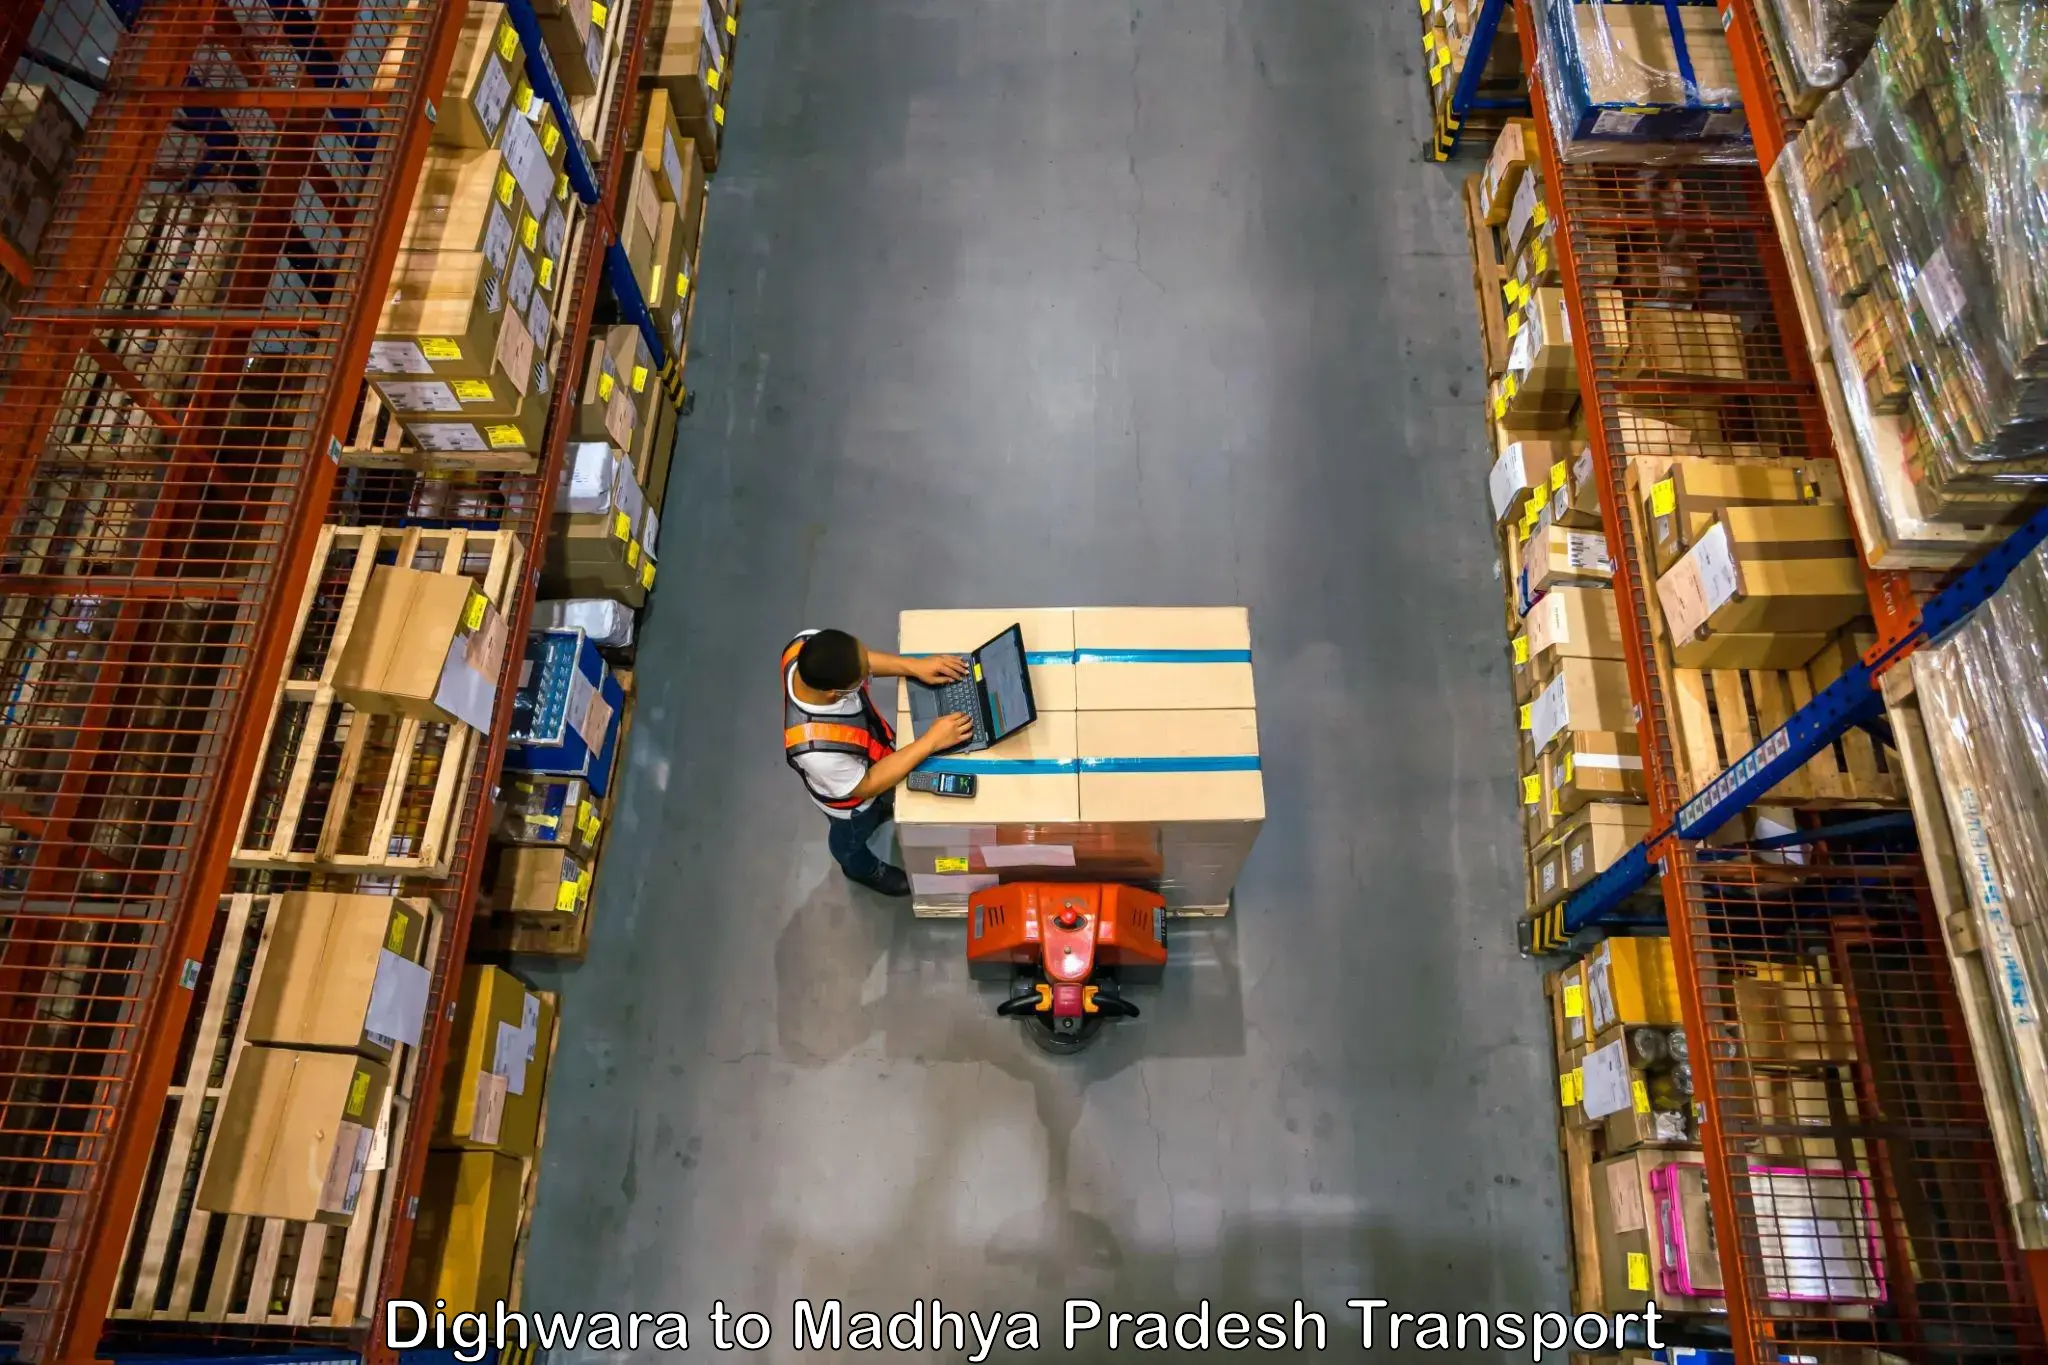 Truck transport companies in India Dighwara to Indore